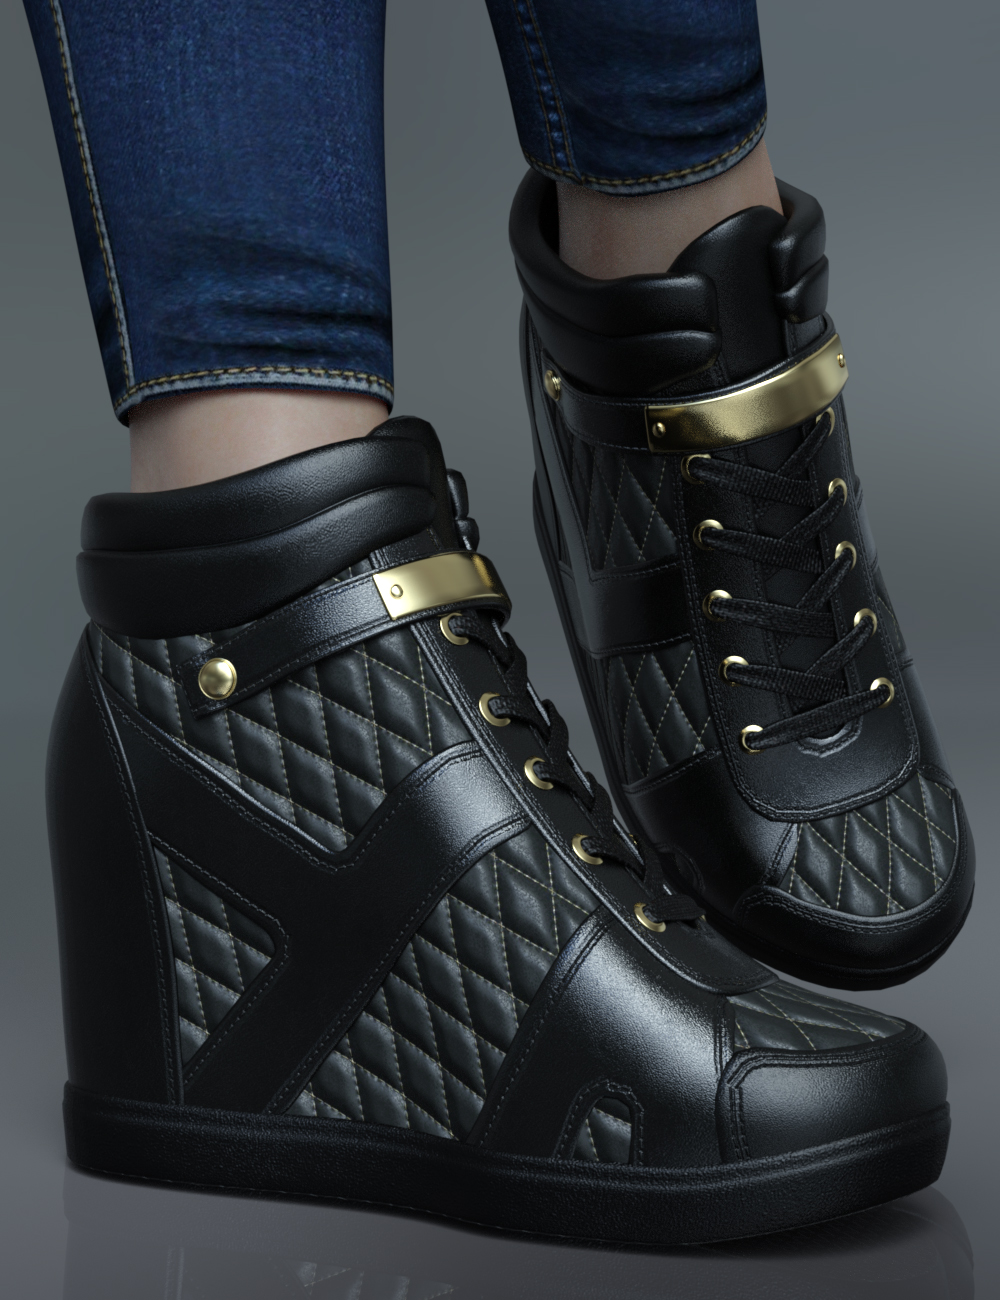 Wedged Sneakers for Genesis 8 Female(s) by: Nikisatez, 3D Models by Daz 3D